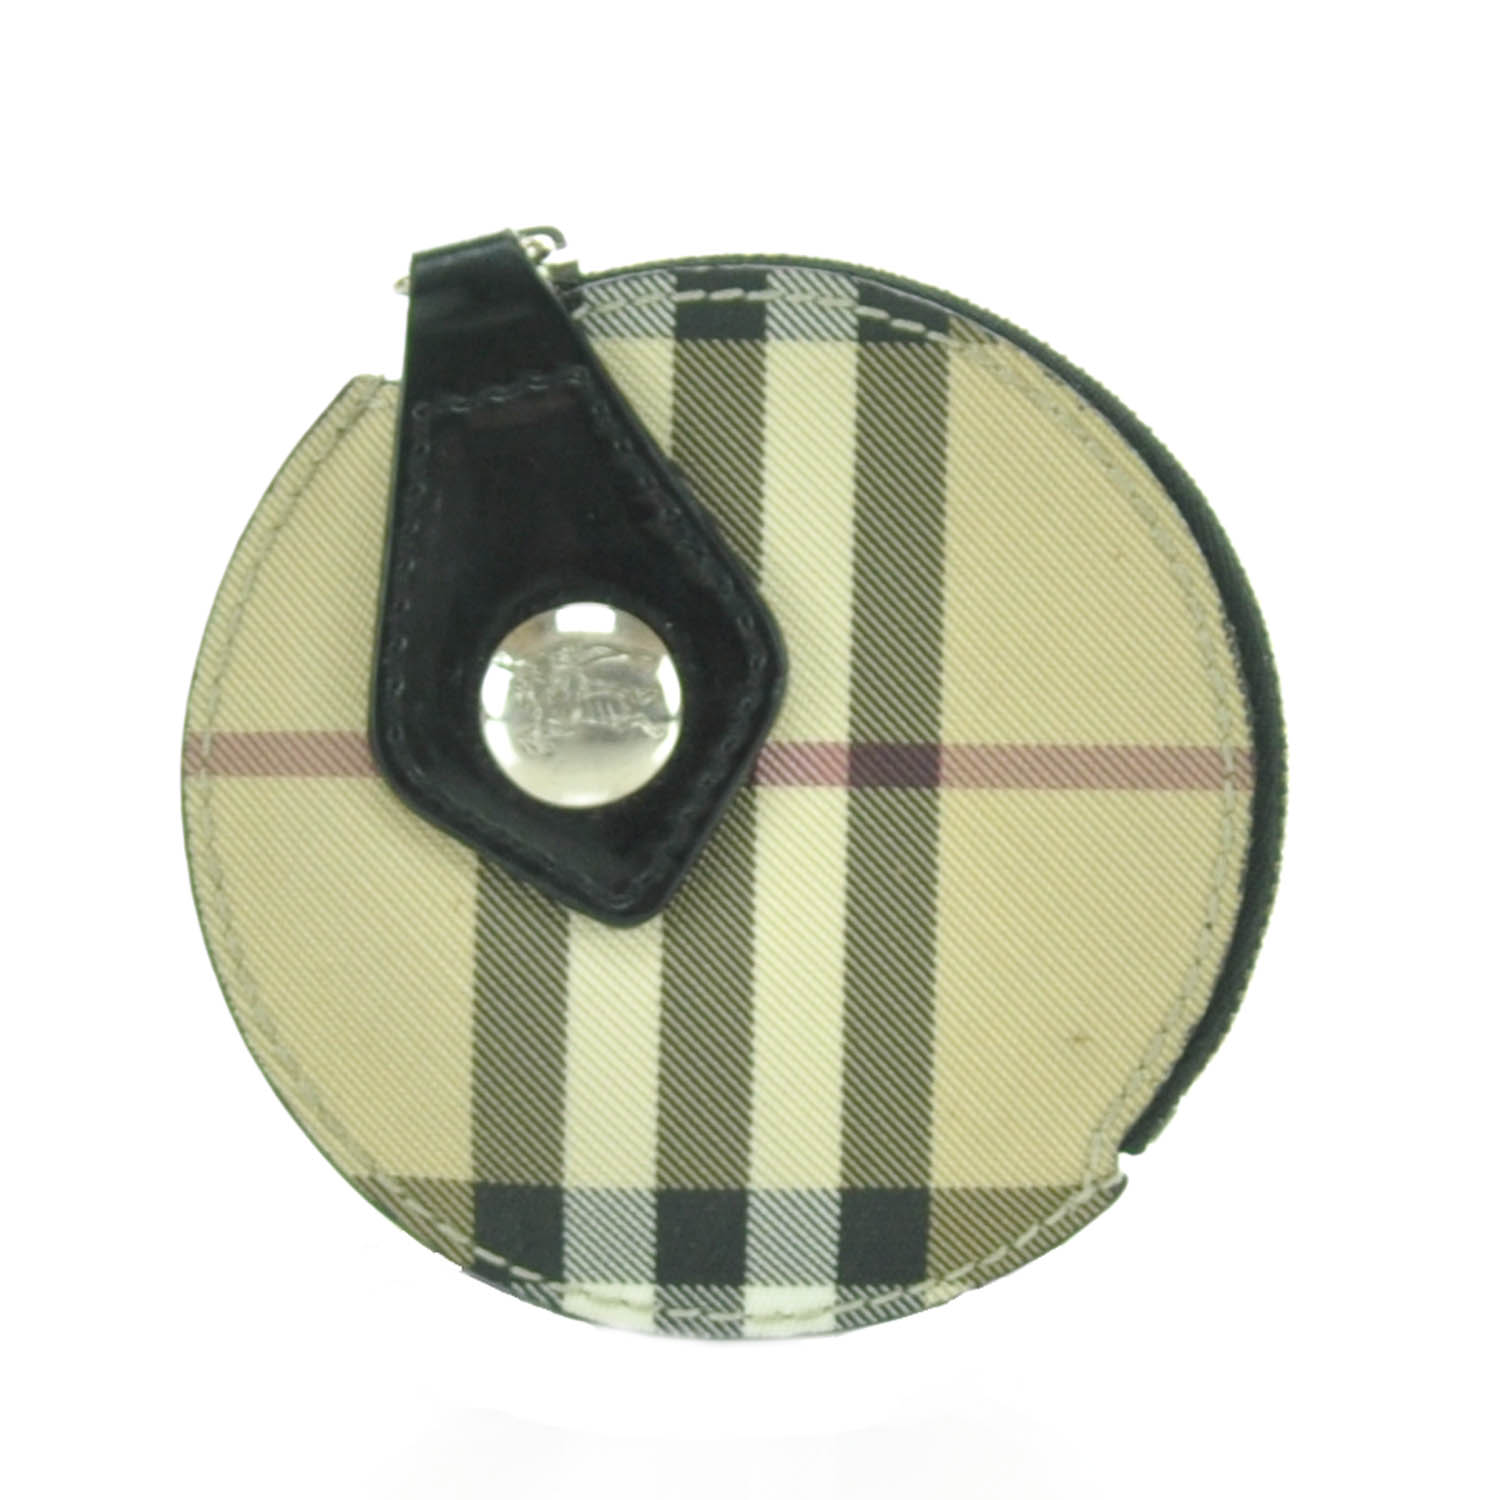 burberry coin pouch keychain